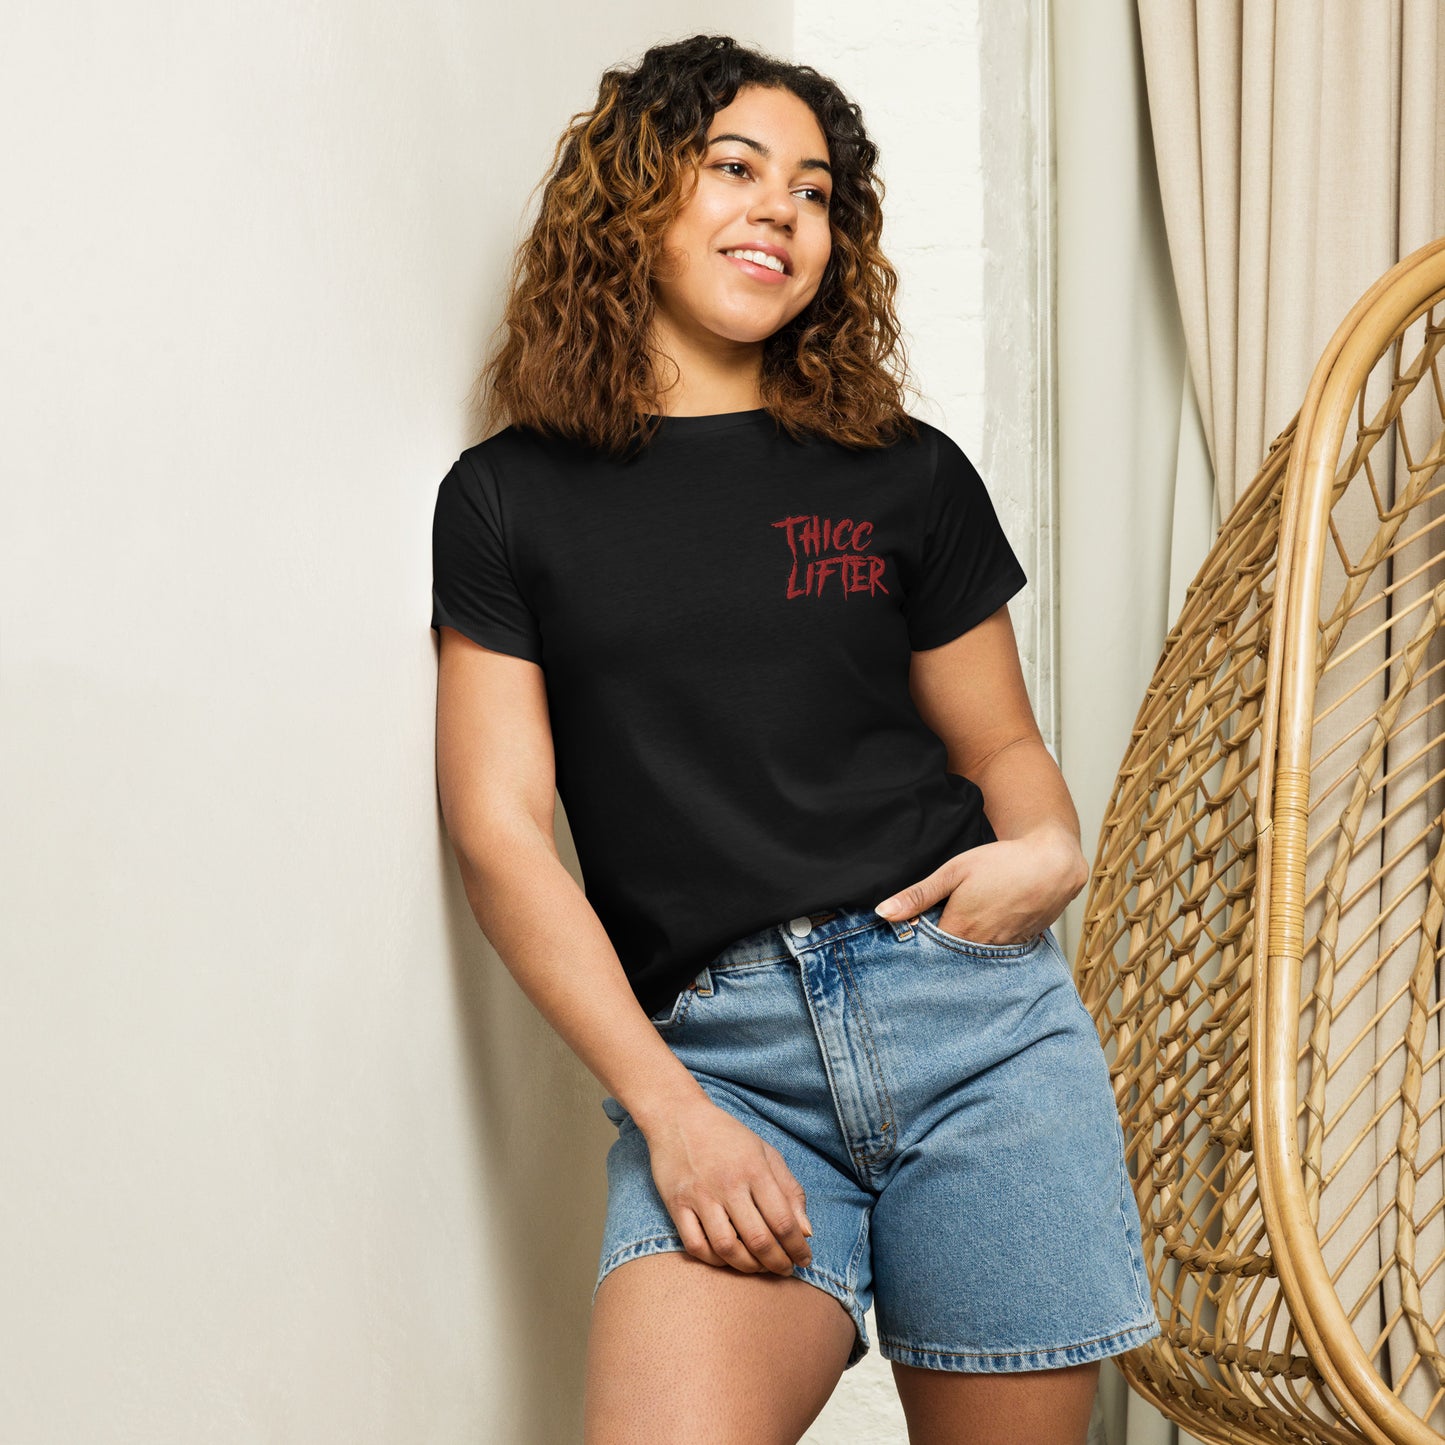 THICC LIFTER EMBROIDERED Women’s high-waisted t-shirt